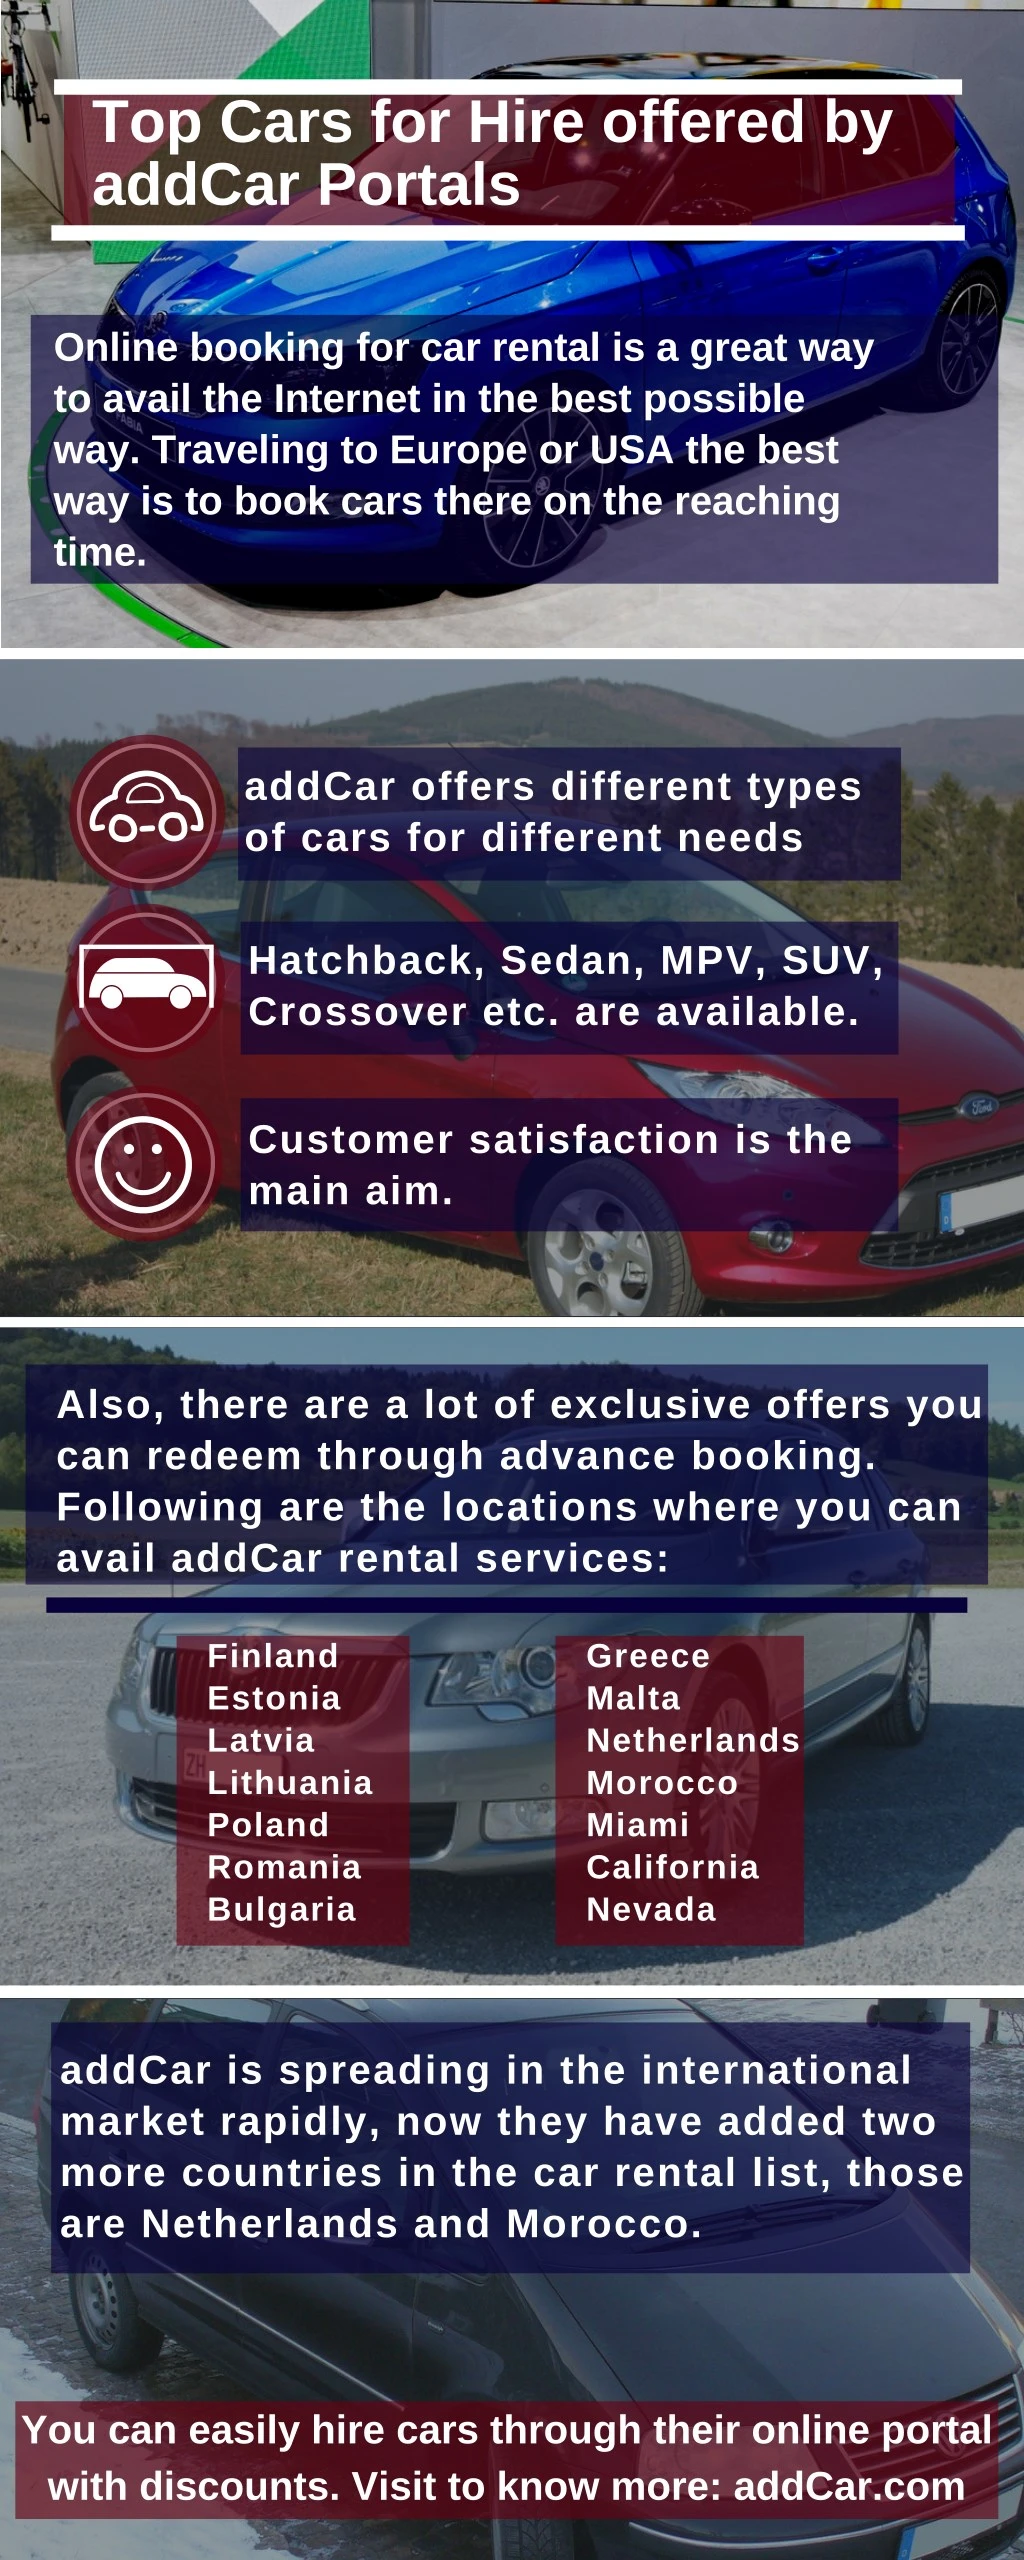 top cars for hire offered by addcar portals